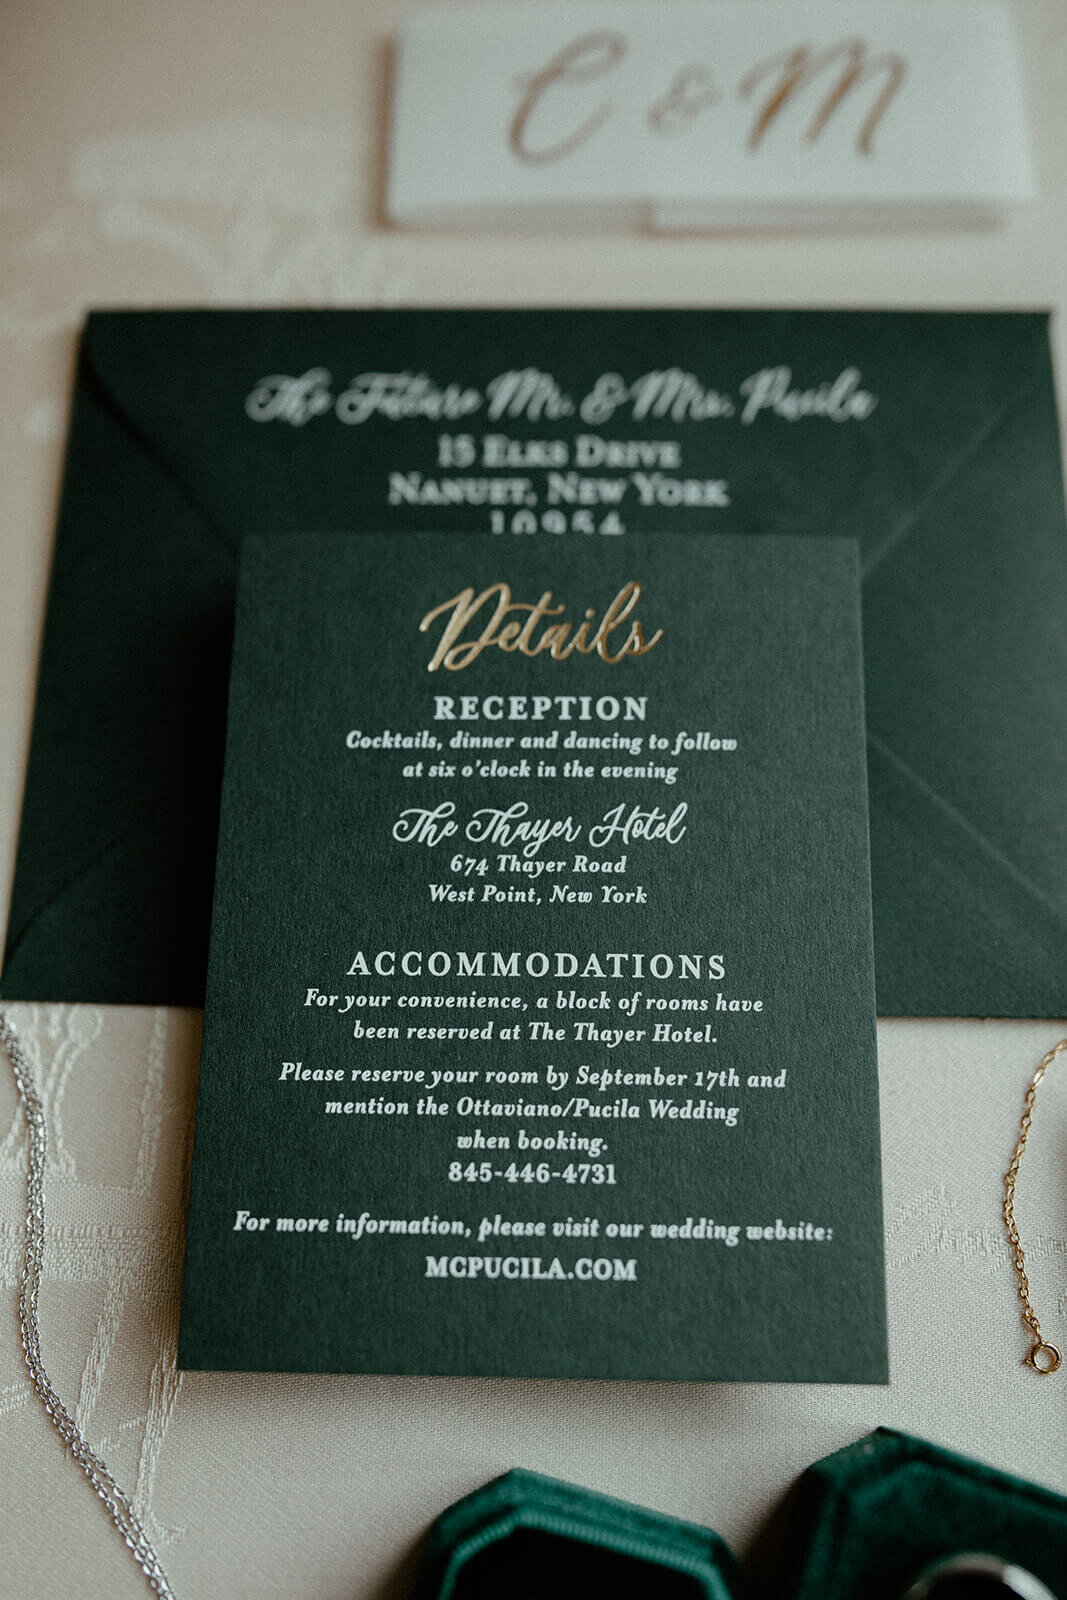 SGH Creative Luxury Wedding Signage & Stationery in New York & New Jersey - Full Gallery (25)